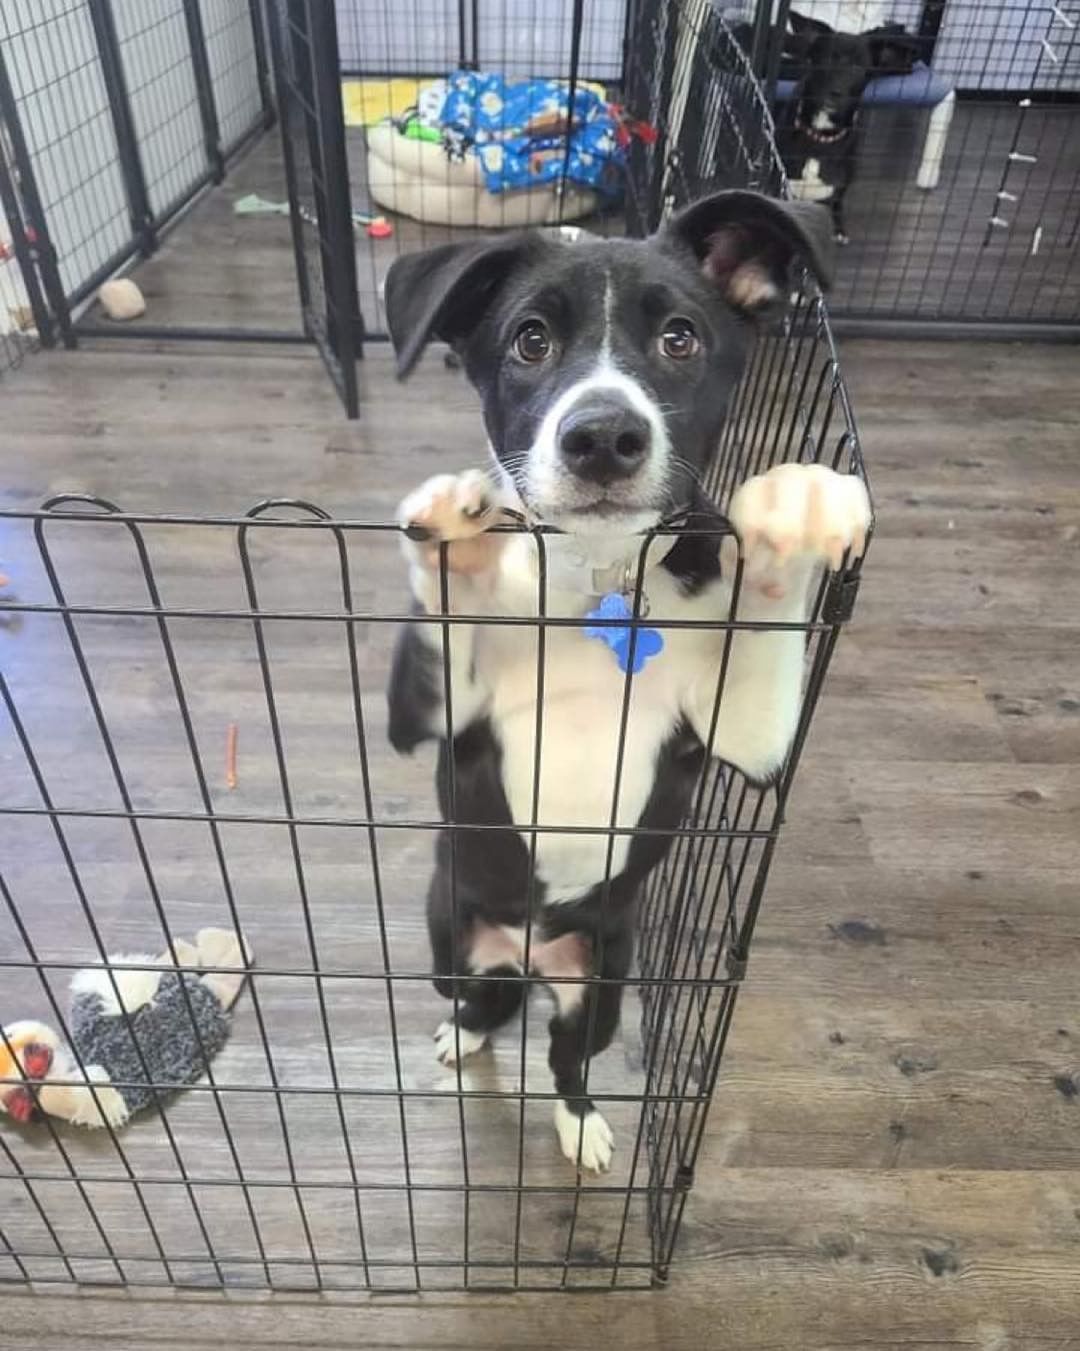 Jacko is wondering why he hasn’t been adopted yet. He came in with a litter of 11! And all of his siblings have found their fur-ever homes except for him. 😩

Come meet Jacko tonight at our open house. From 4:30-6:30 at RSQ adoption center. 

1838 w 1020n UNIT B
St. George, Ut. 84770

rsqutah.org